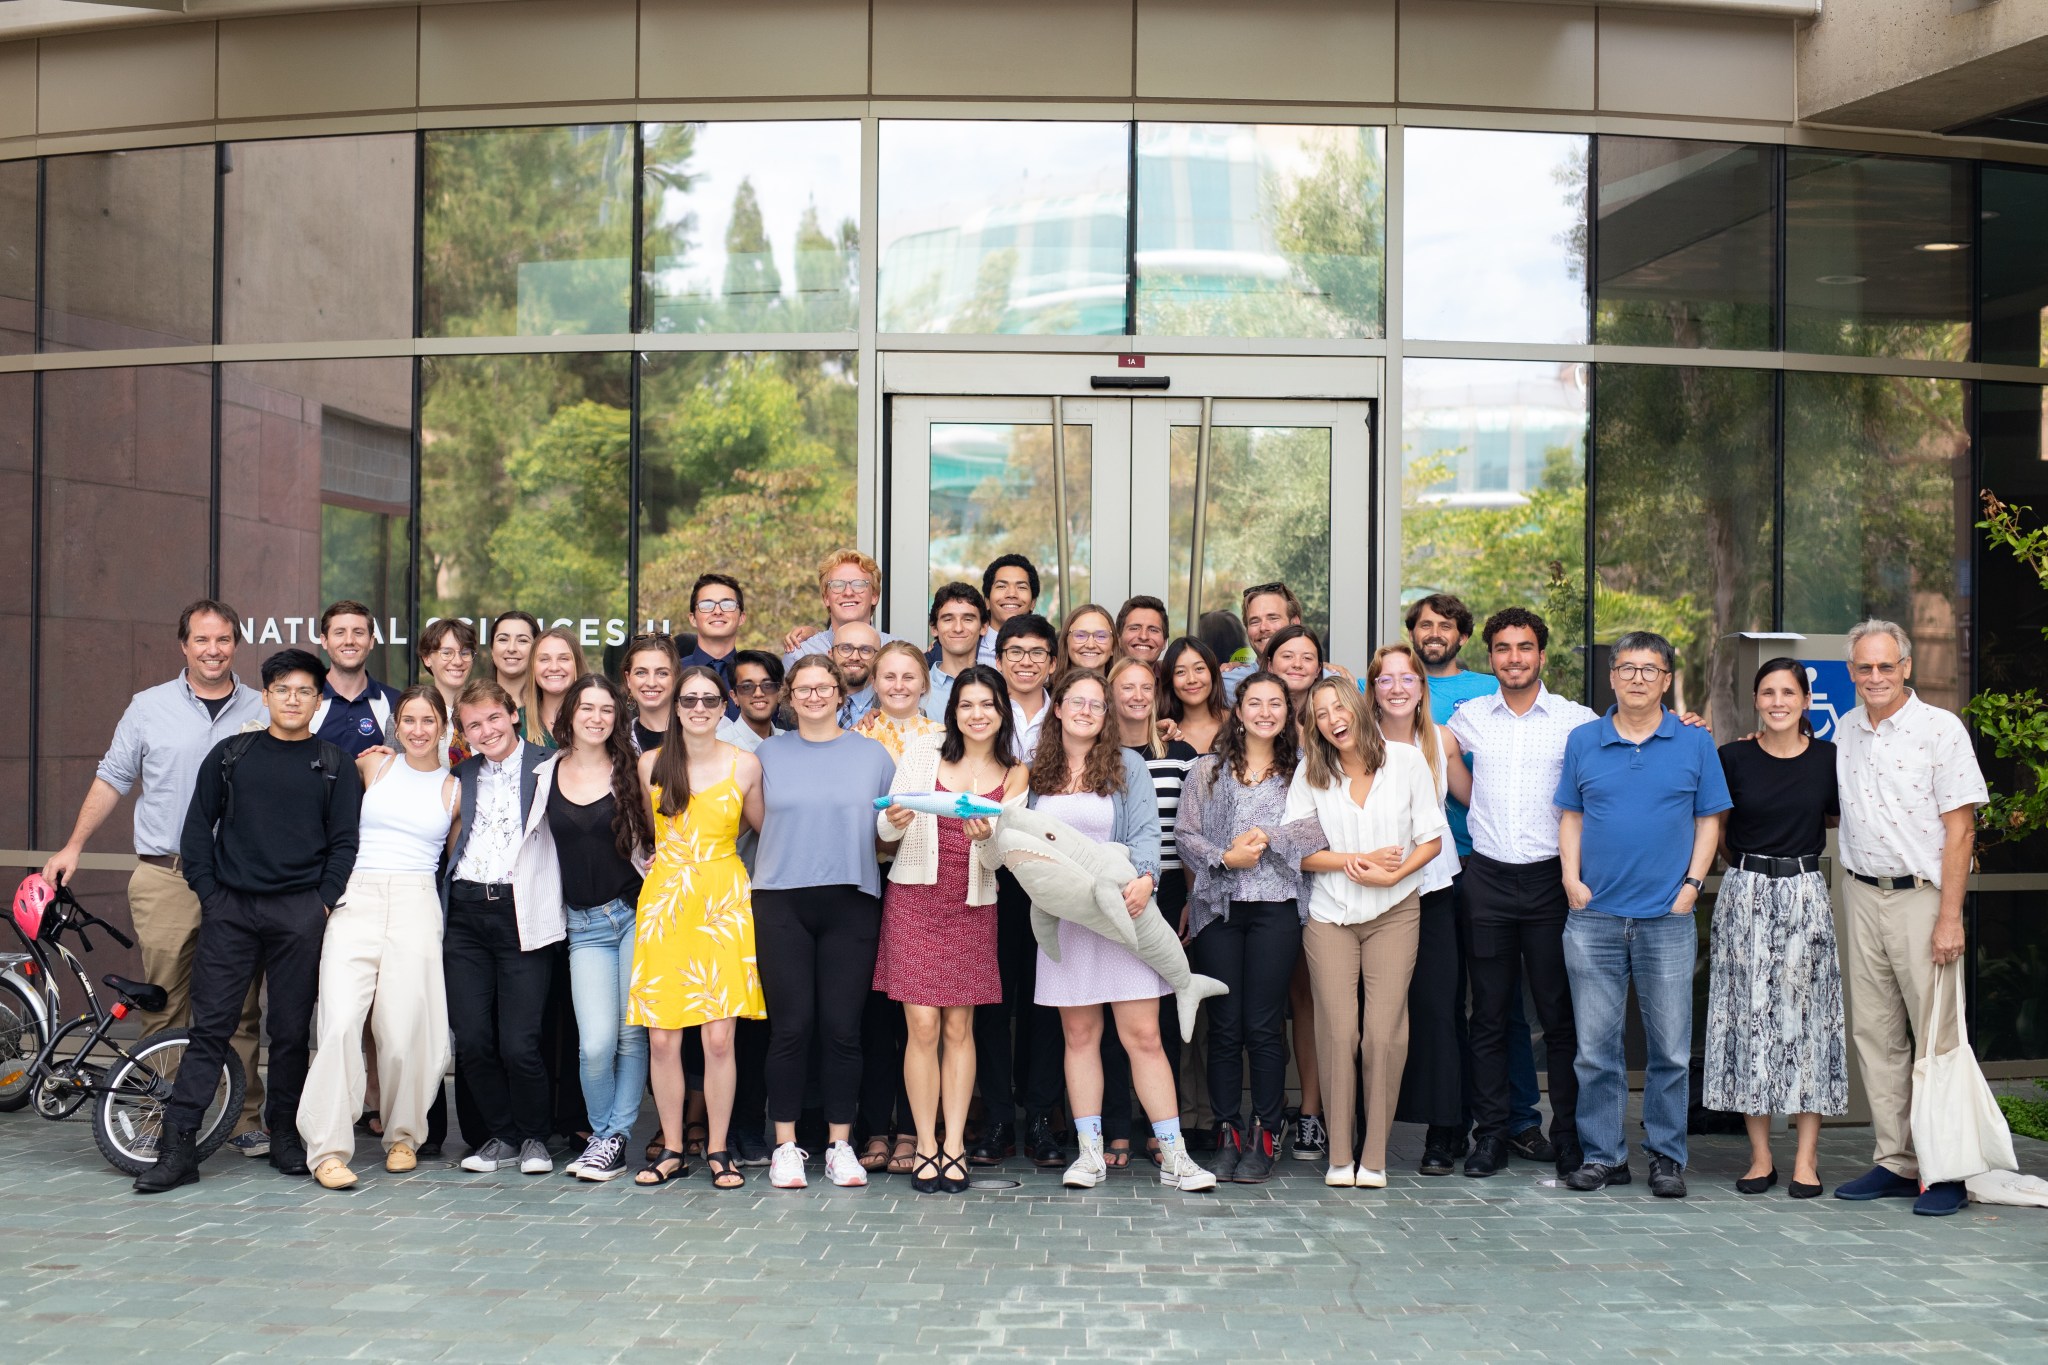 Students and staff of the 2023 SARP West internship program gather outside the Natural Sciences building at UC Irvine, after concluding the program with research presentations and a graduation ceremony.